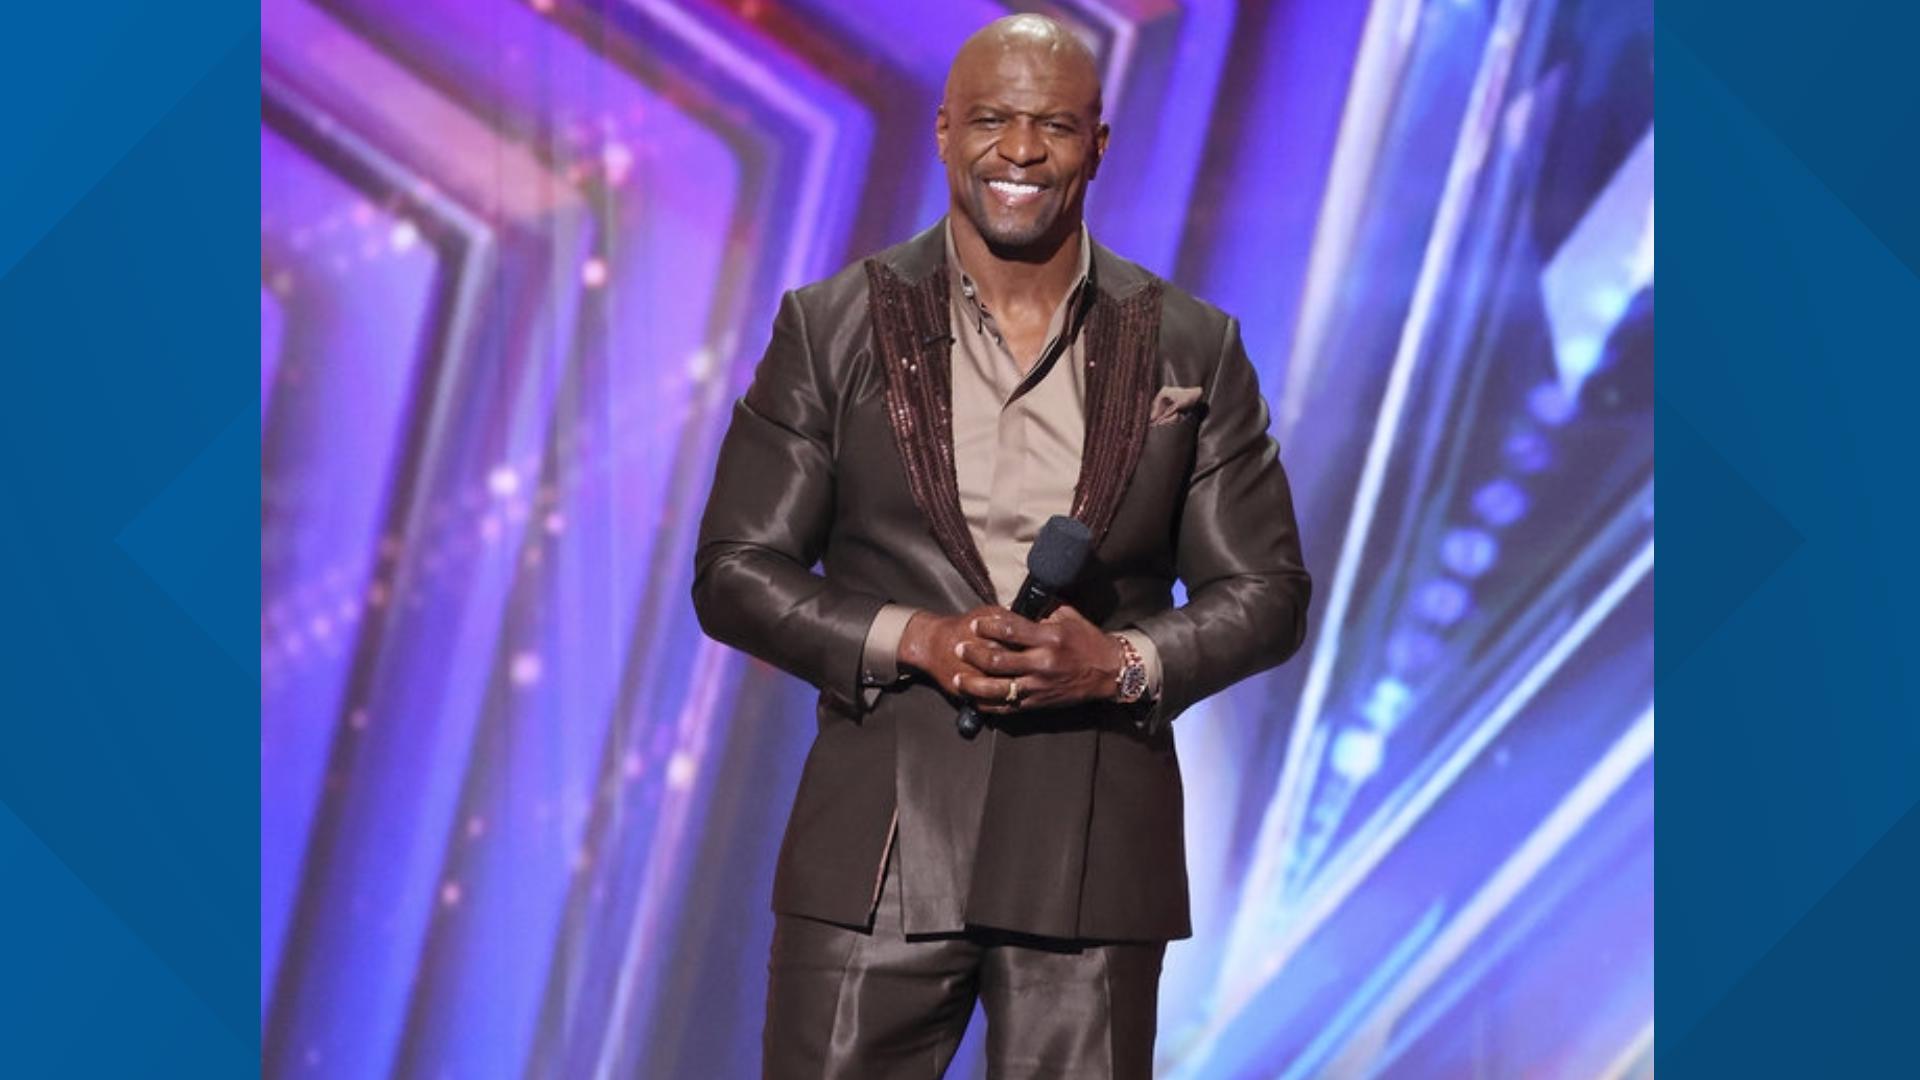 'AGT' host Terry Crews previews 19th season of talent competition